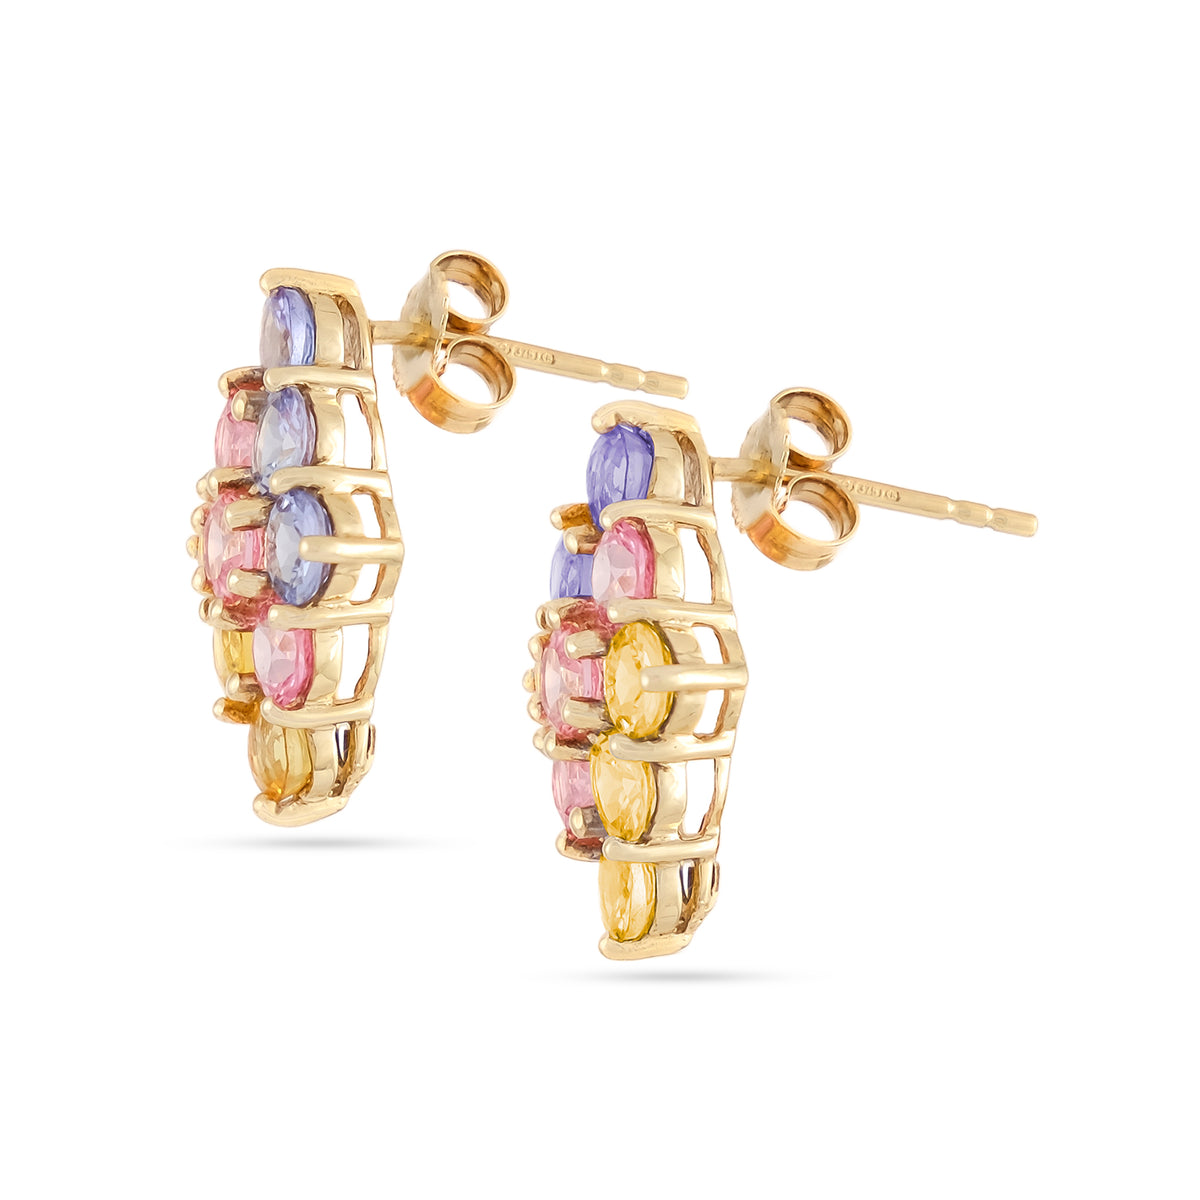 Vintage 9ct Yellow Gold Multi-Stone Earrings